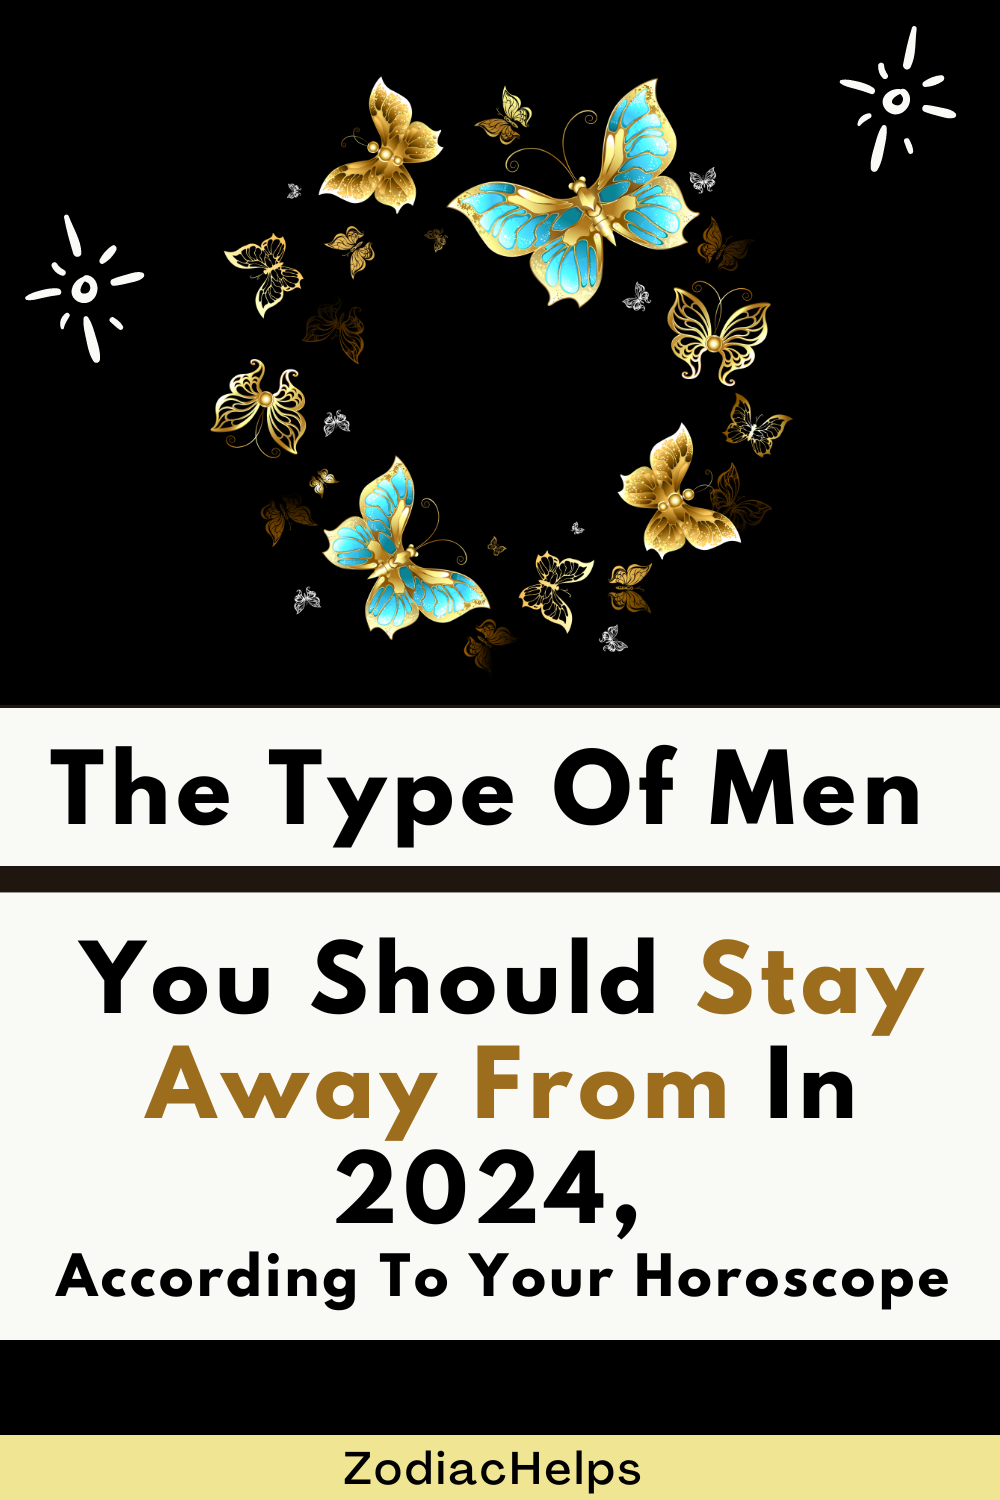 The Type Of Men You Should Stay Away From In 2024, According To Your Horoscope